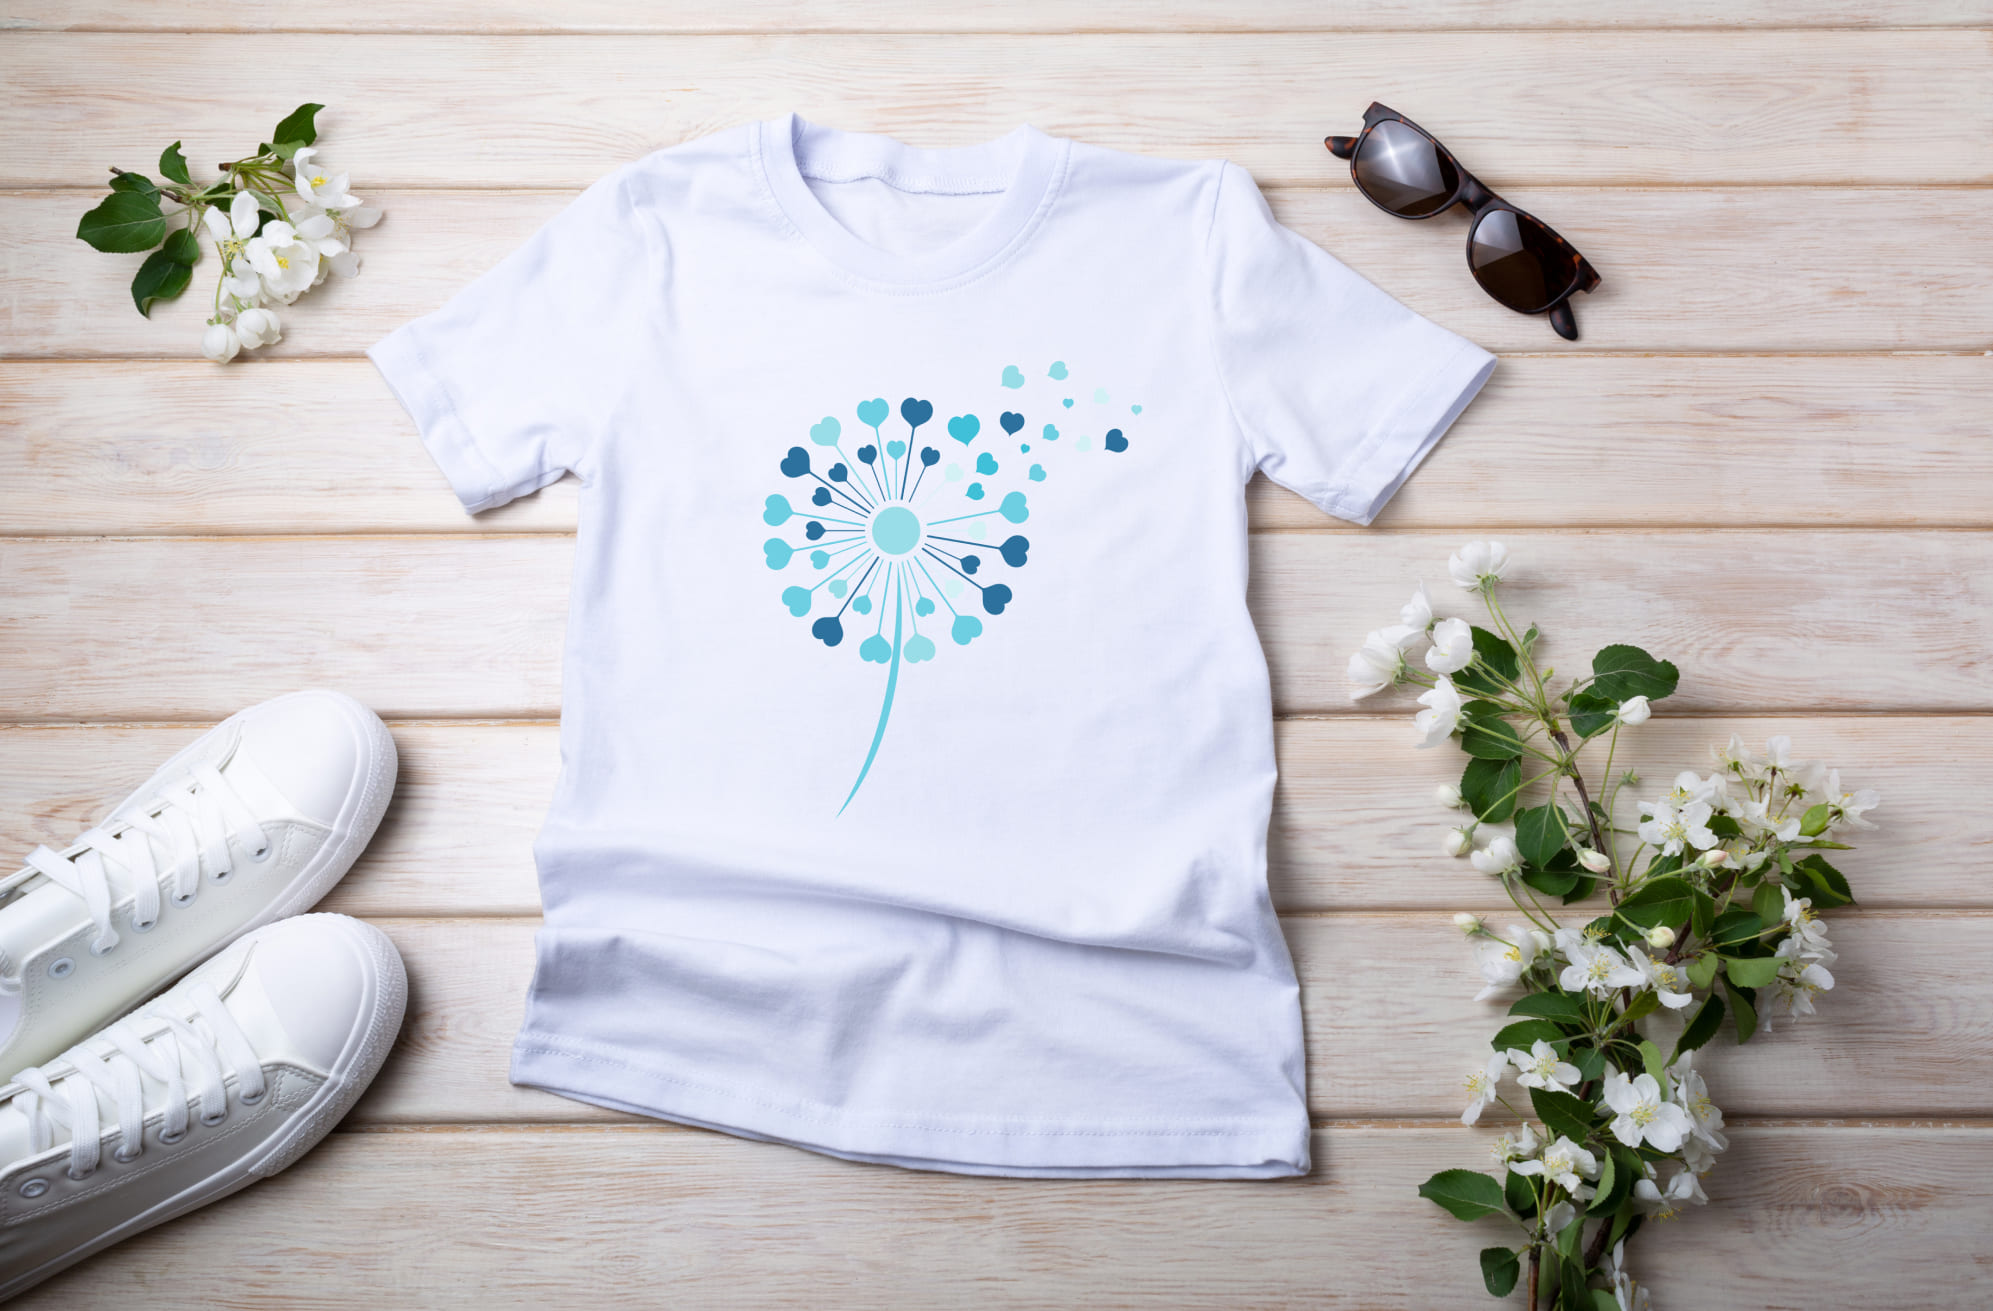 White T-shirt with light blue and blue dandelion flower and sunglasses with white sneakers.